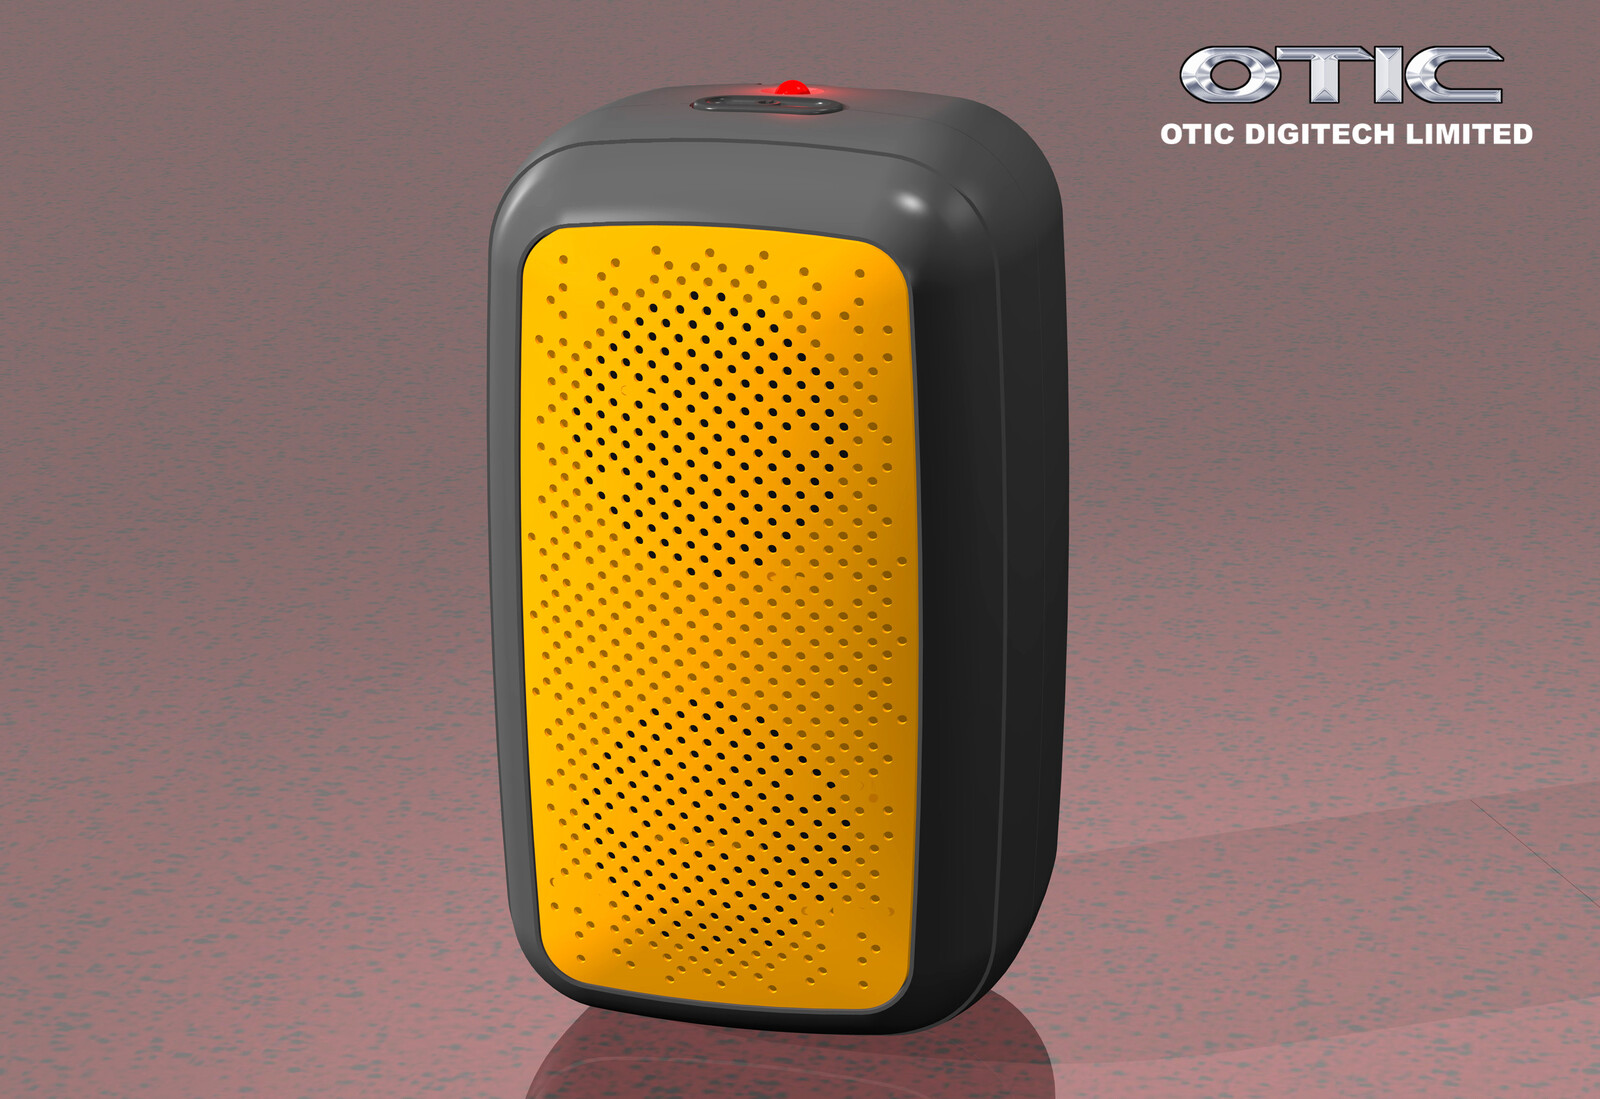 💎 Bluetooth Speaker | Design by Leung Chung Kwan on 2016 💎
Brand Name︰OTIC | Client︰OTIC Limited
Product Design Specification︰http://bit.ly/ot1702-d2-v1